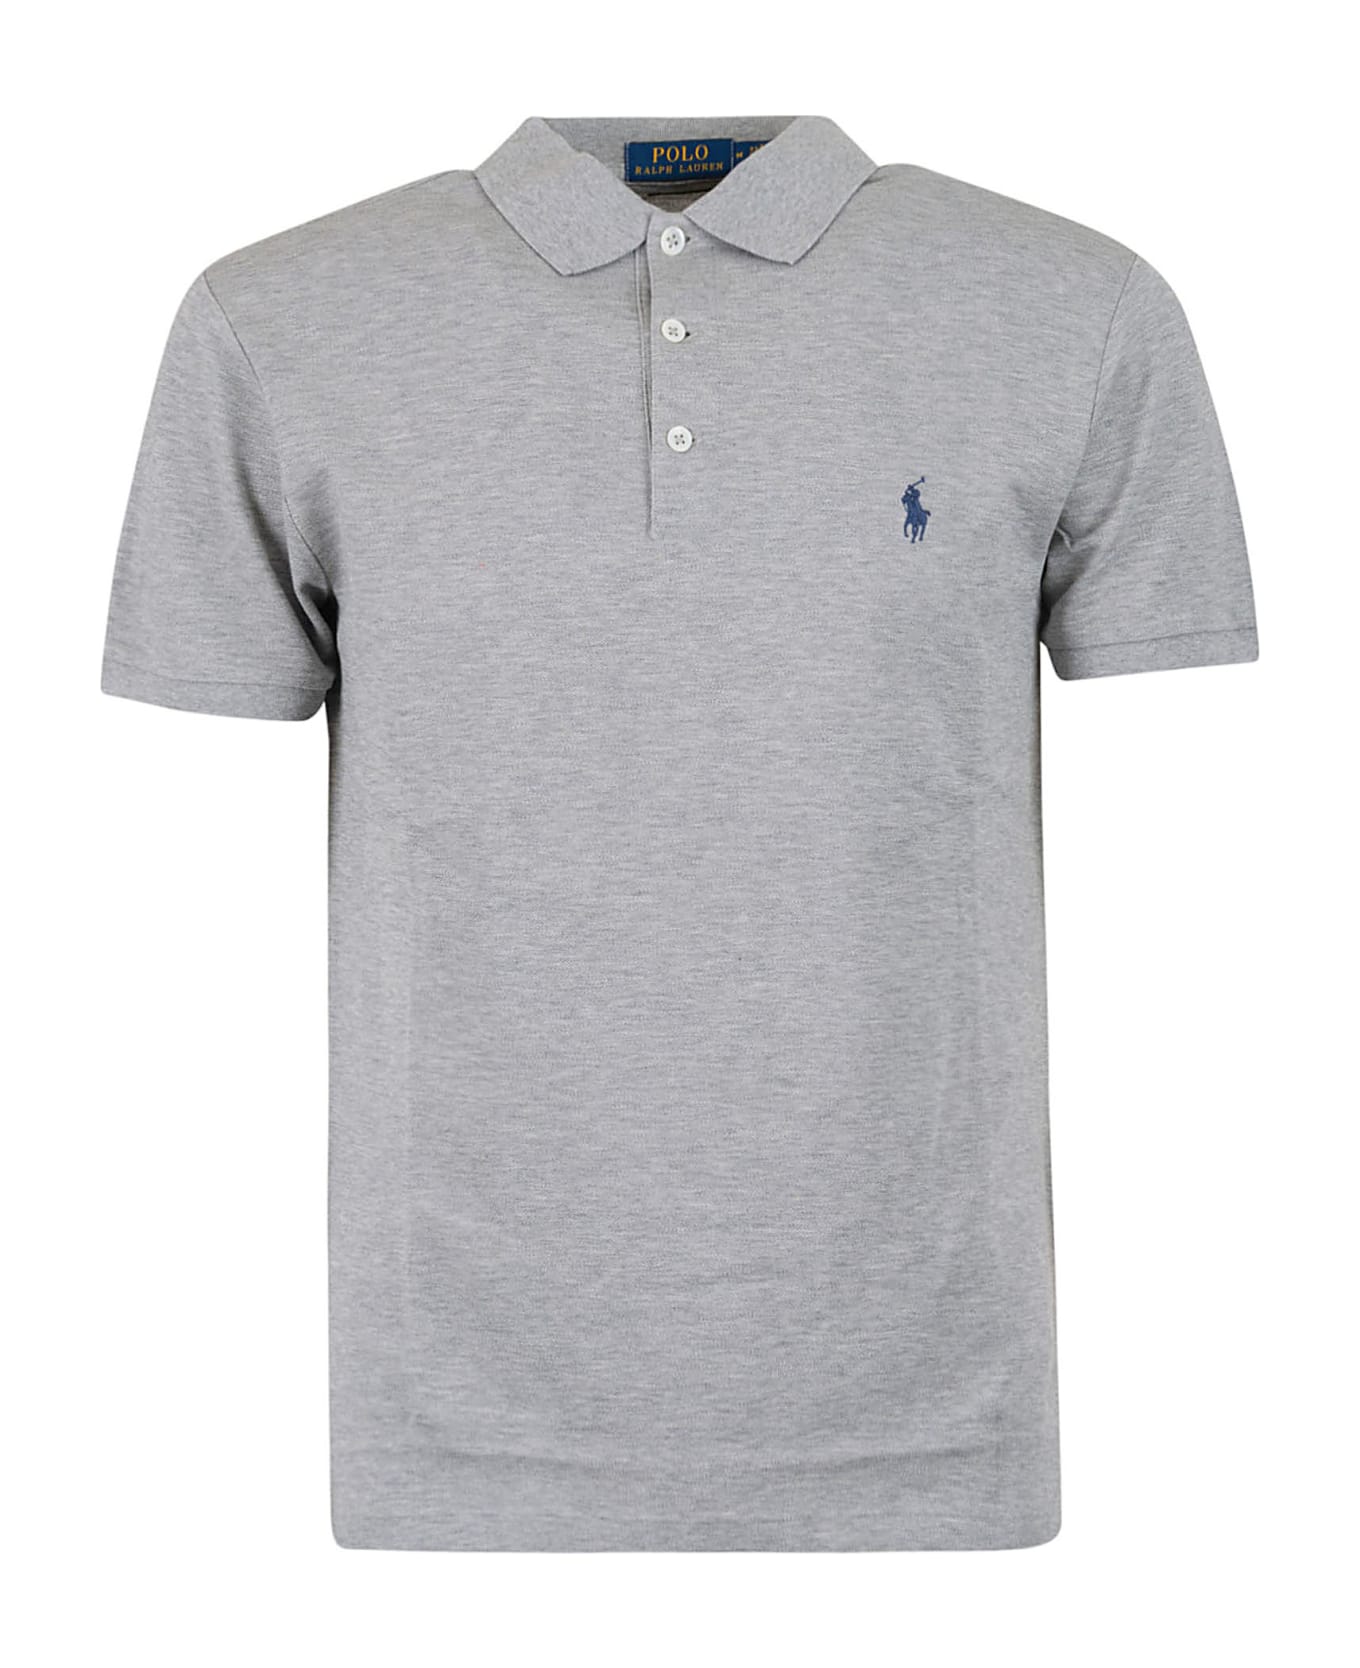 Ralph Lauren Logo Embroidered Polo Shirt - Andver Heather